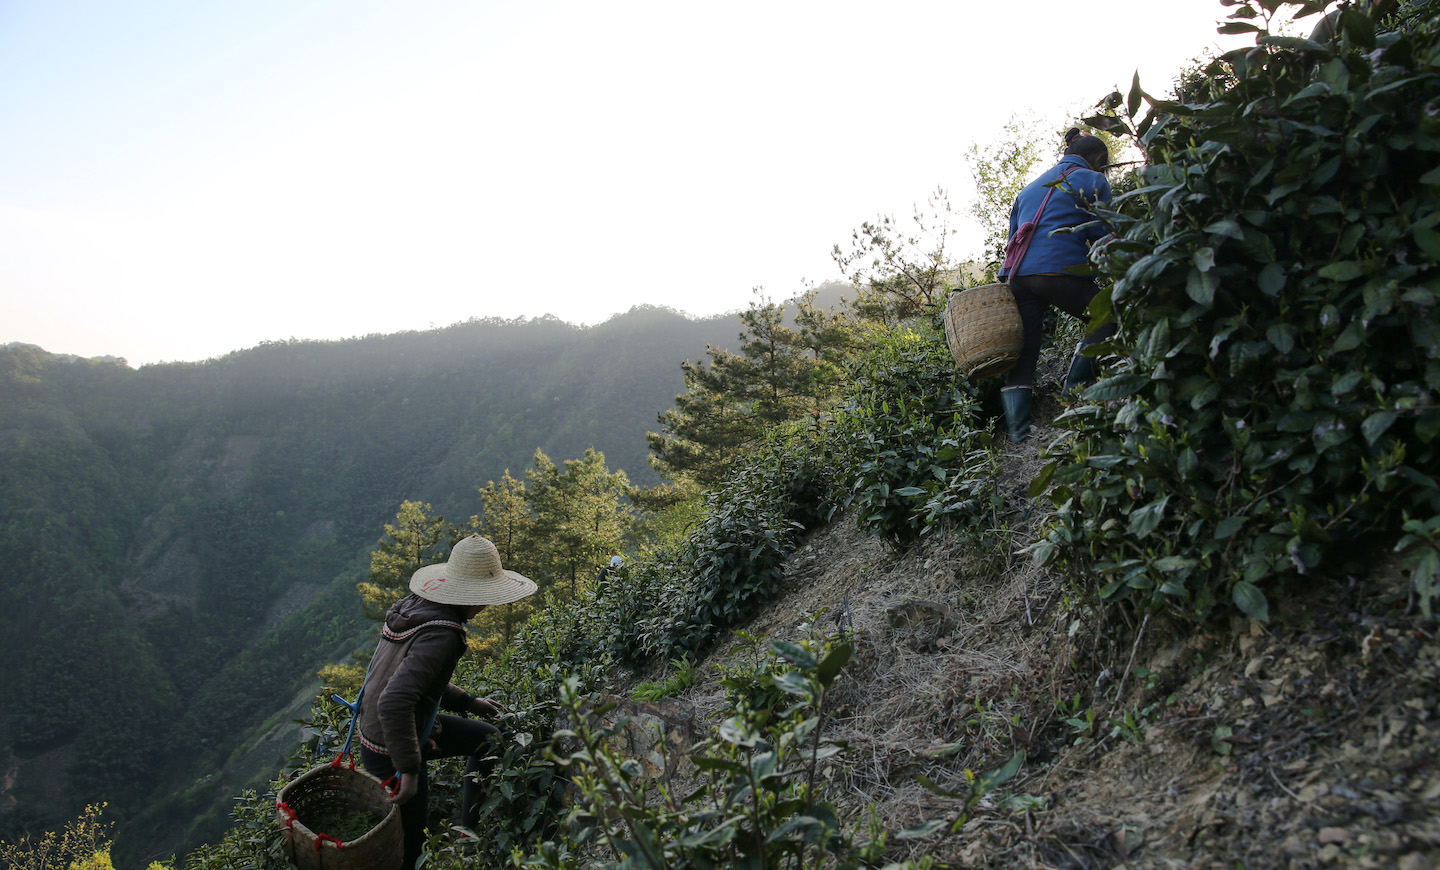 Two tea pickers with baskets climbing to the top of the mountain peak to harvest Huangshan Maofeng green tea early in the morning, with the sun just rising and the still shady sides of the opposite mountain face in the background.